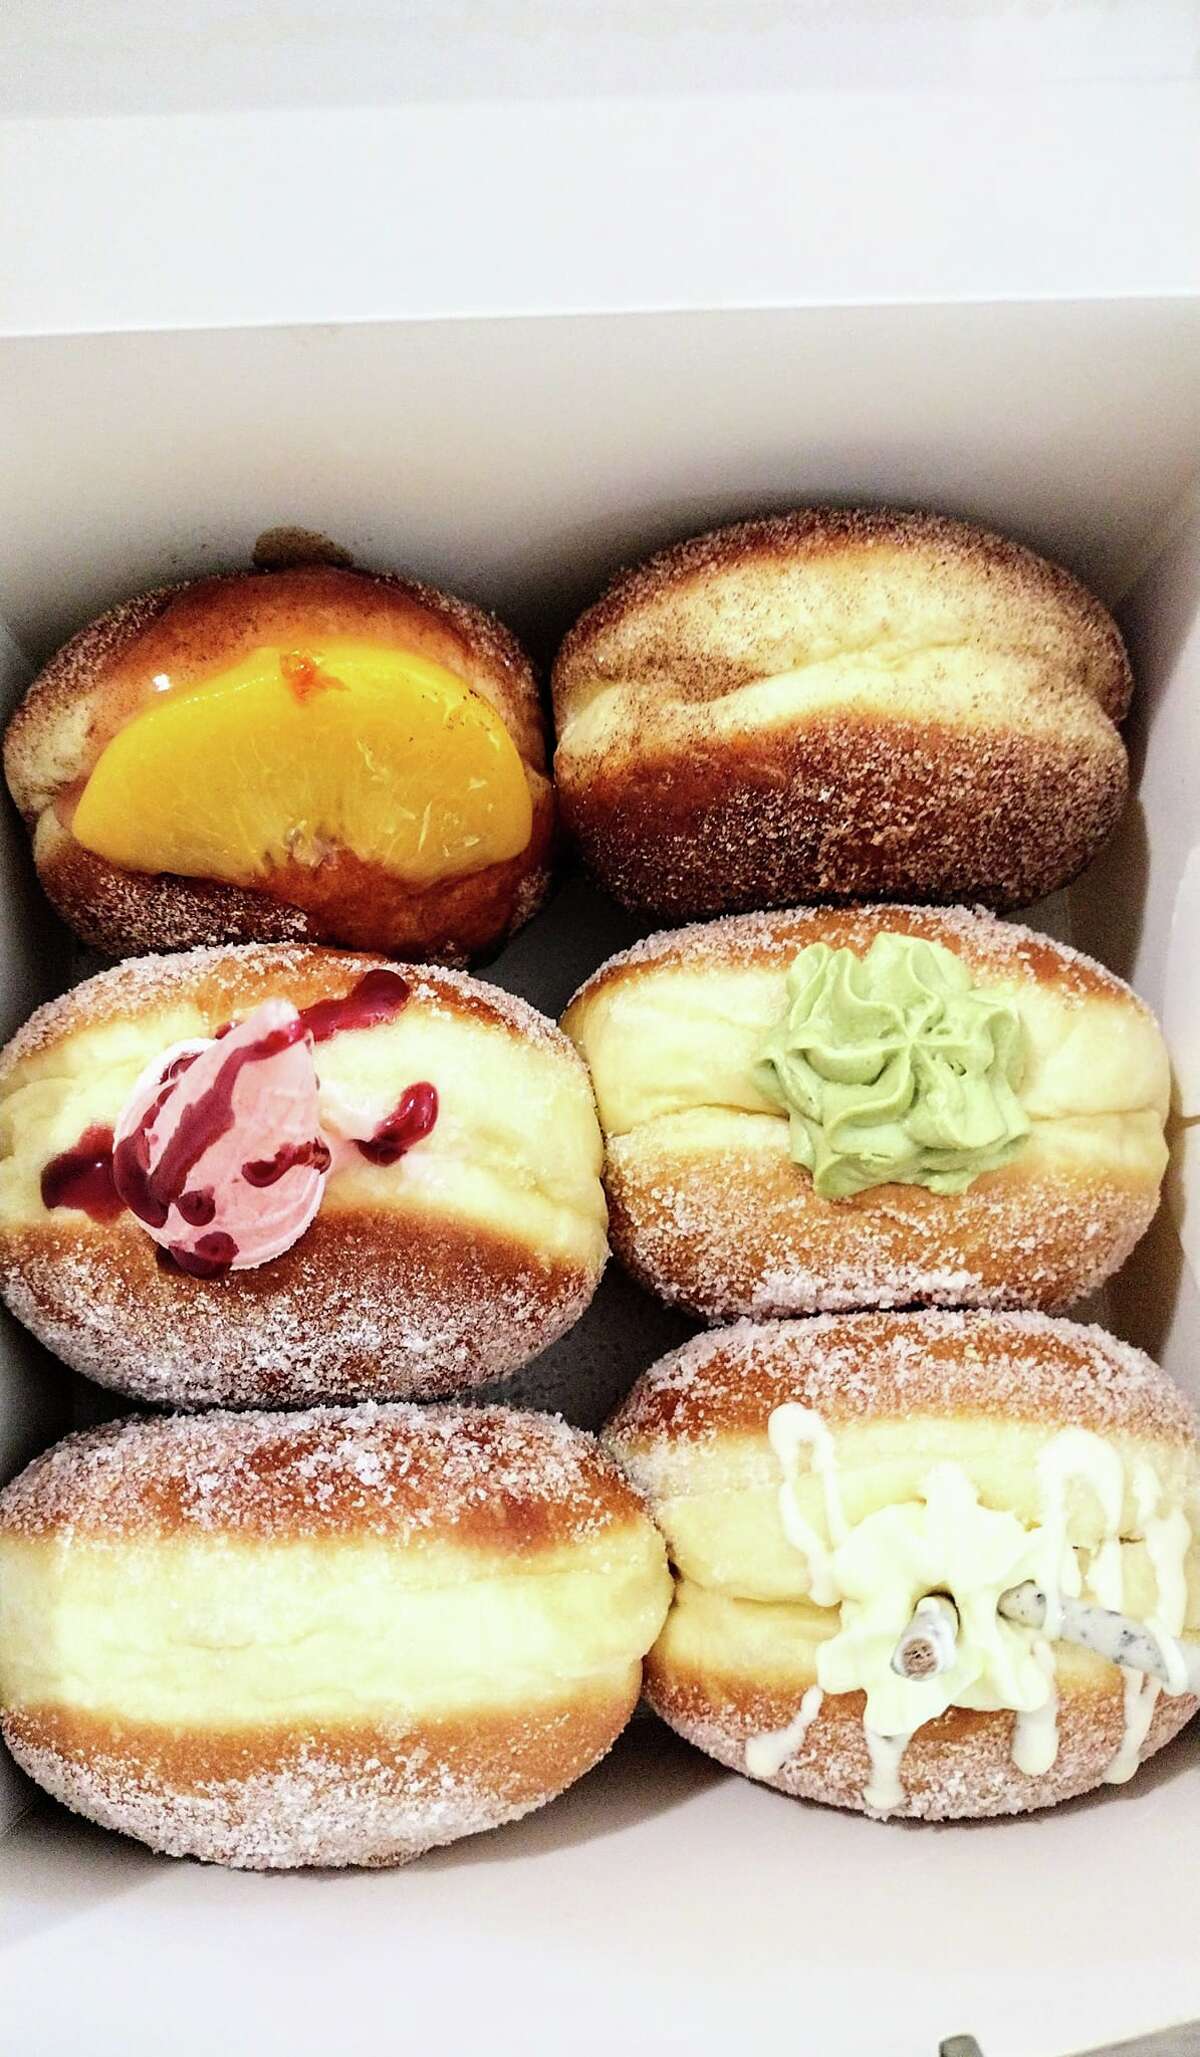 Magical Fantasia in Bridgeport is  crafting "luxury bomboloni": fluffy filled doughnuts with an airy brioche dough, customized with dozens of cream, jam and curd fillings.